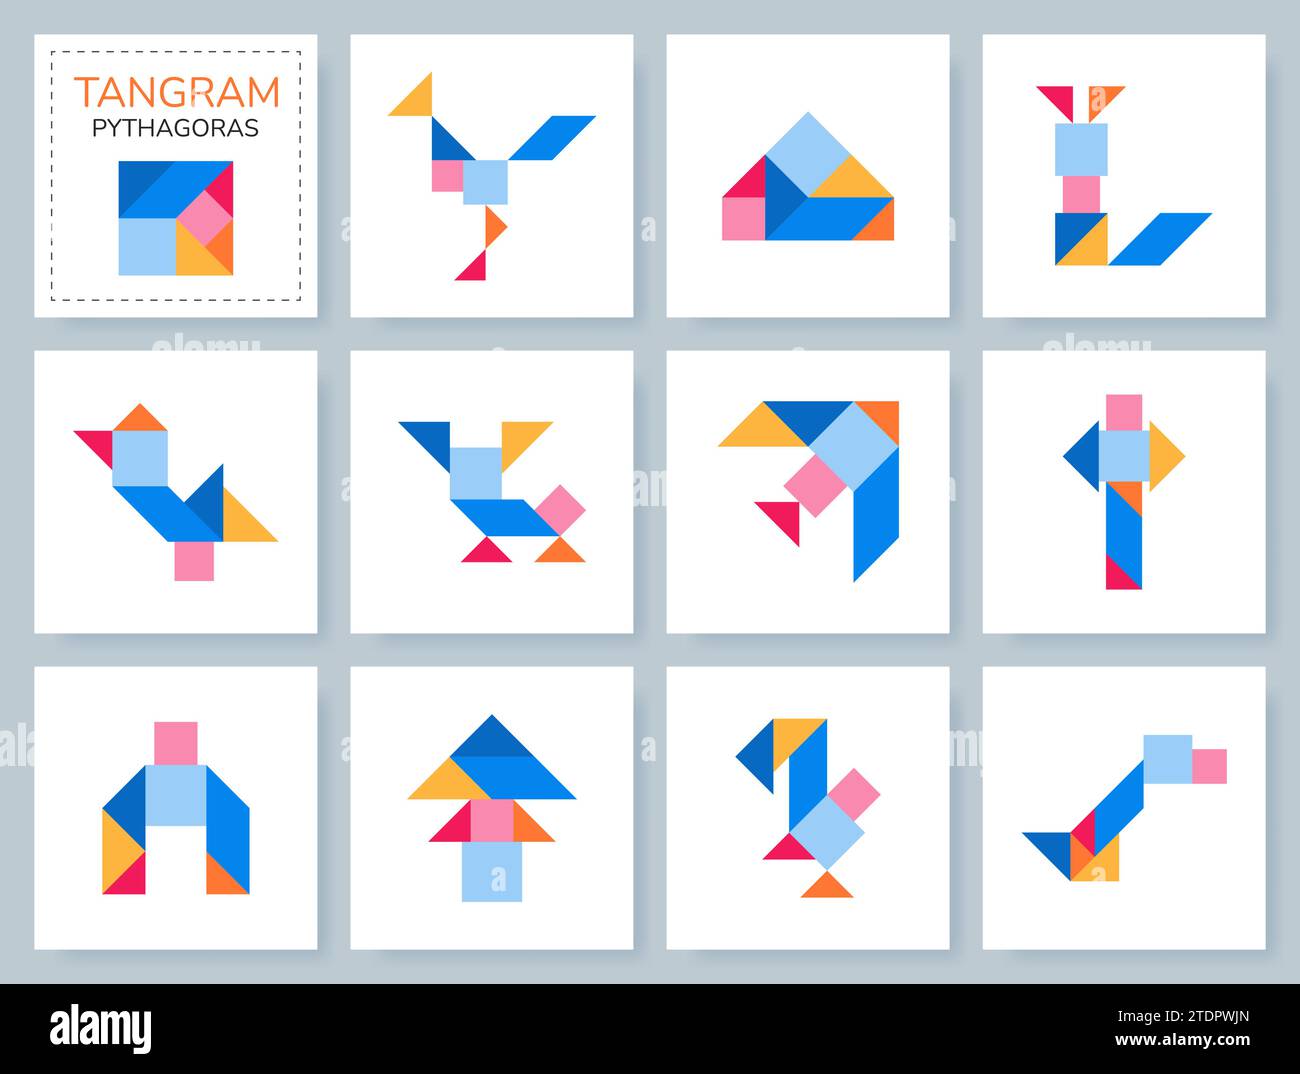 Tangram Pythagoras puzzle. Vector set with various objects. Stock Vector